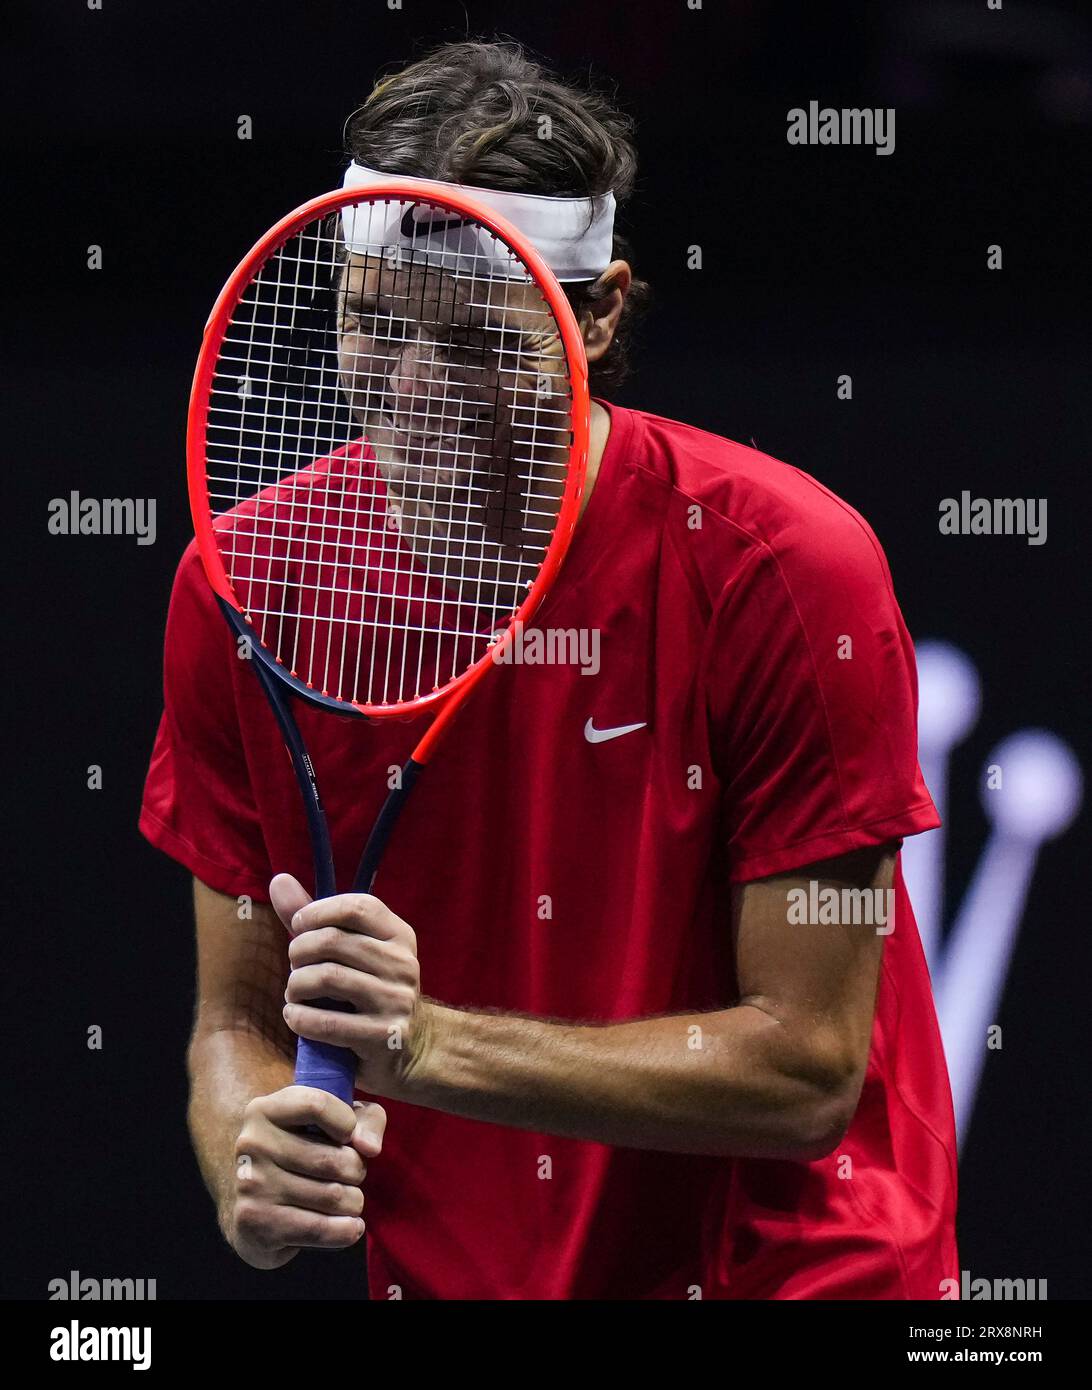 Team Worlds Taylor Fritz reacts during a tennis match against Team Europes Andrey Rublev at Laver Cup on Saturday, Sept